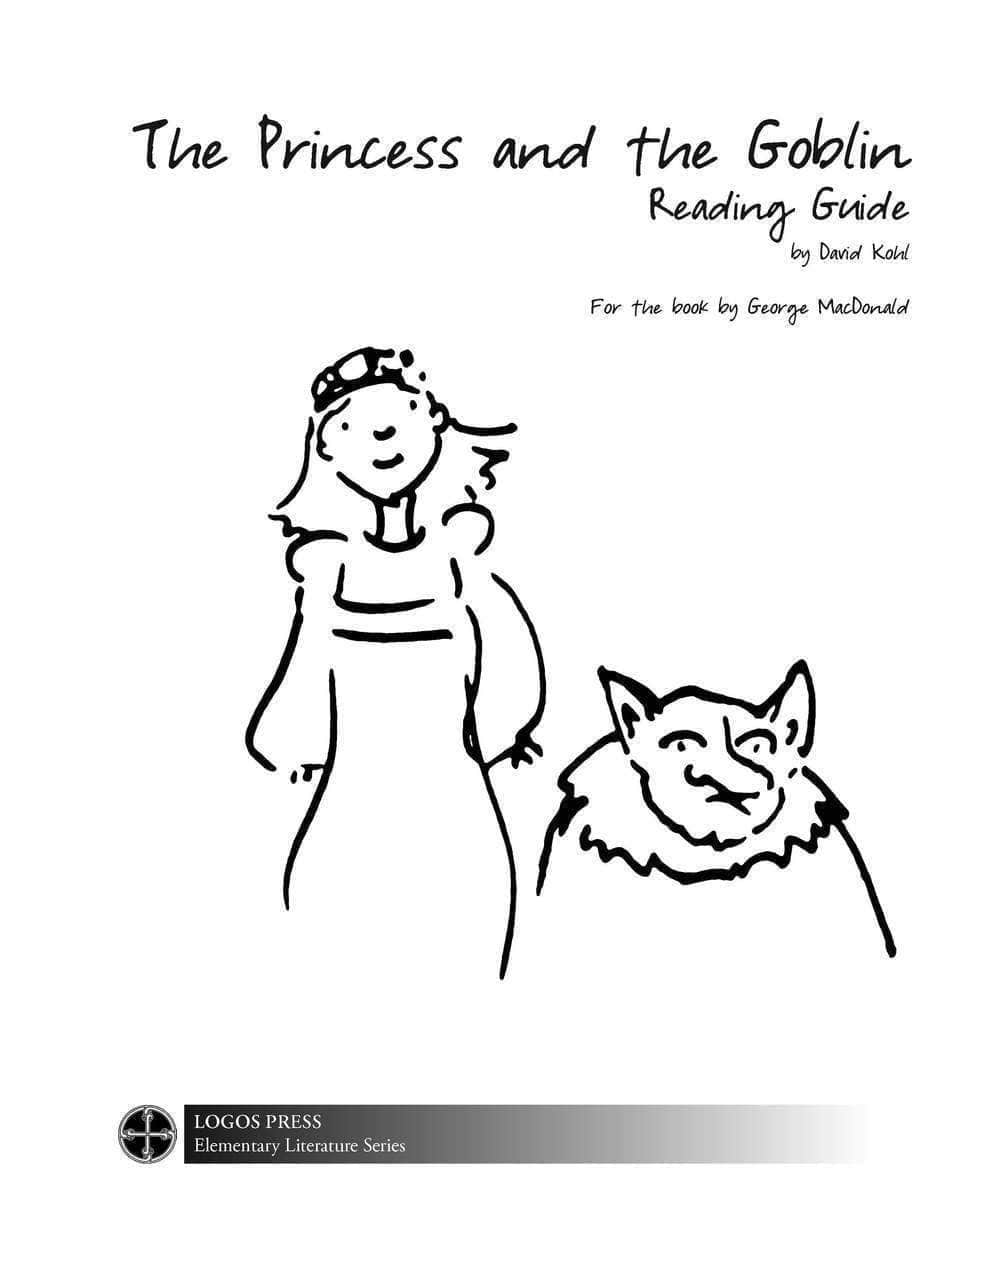 The Princess and the Goblin - Reading Guide (Download)